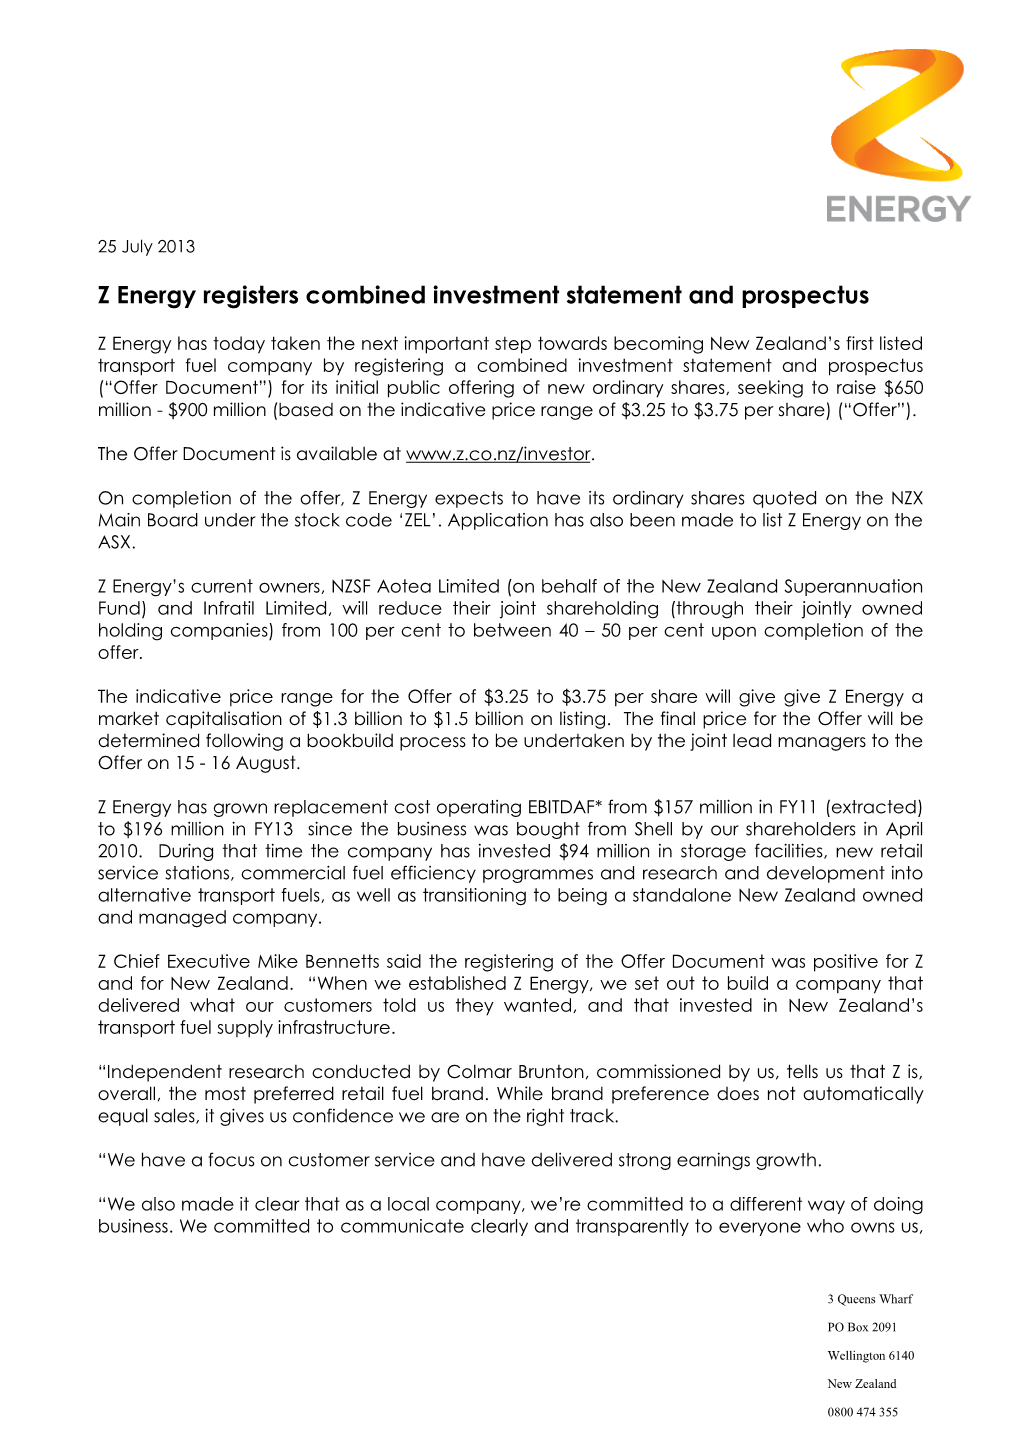 Z Energy Registers Combined Investment Statement and Prospectus